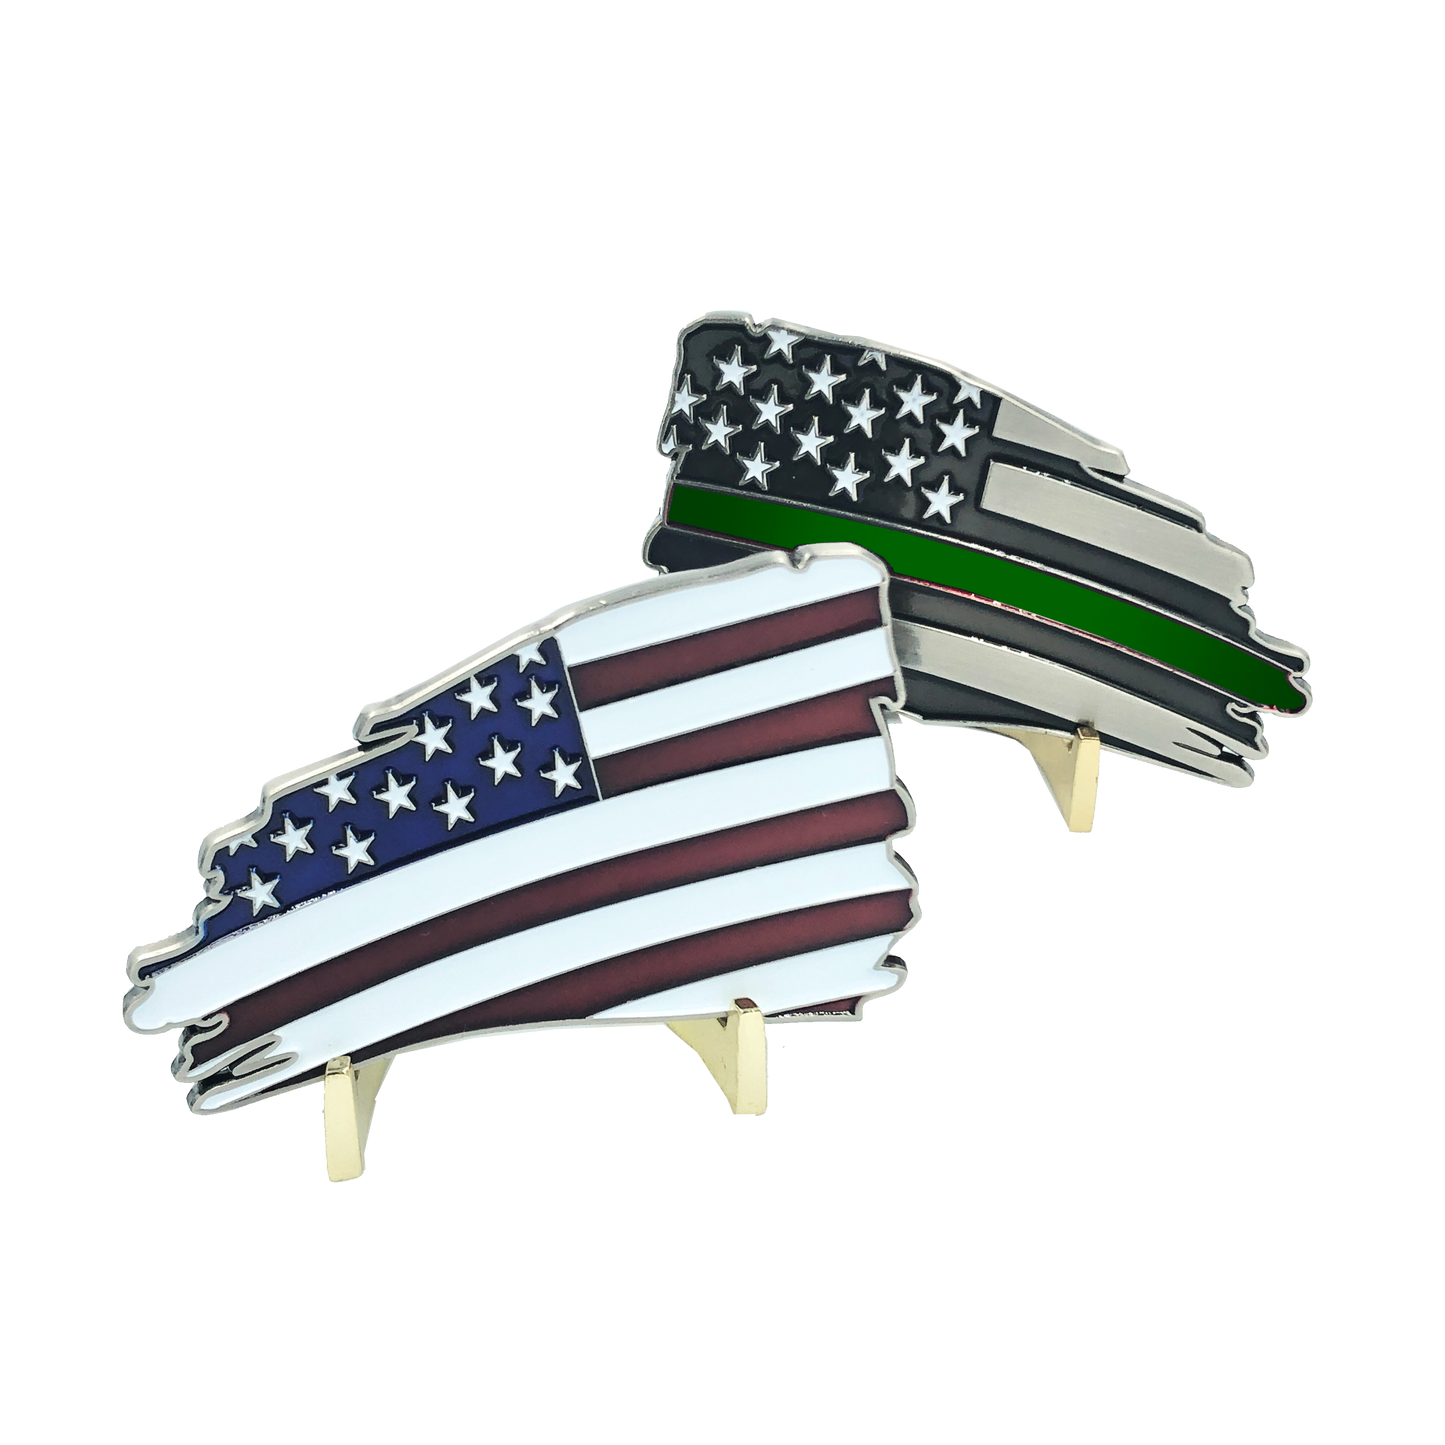 G-001 Thin Green Line Old Glory American Flag Challenge Coin Police CBP Border Patrol Security Army Marines